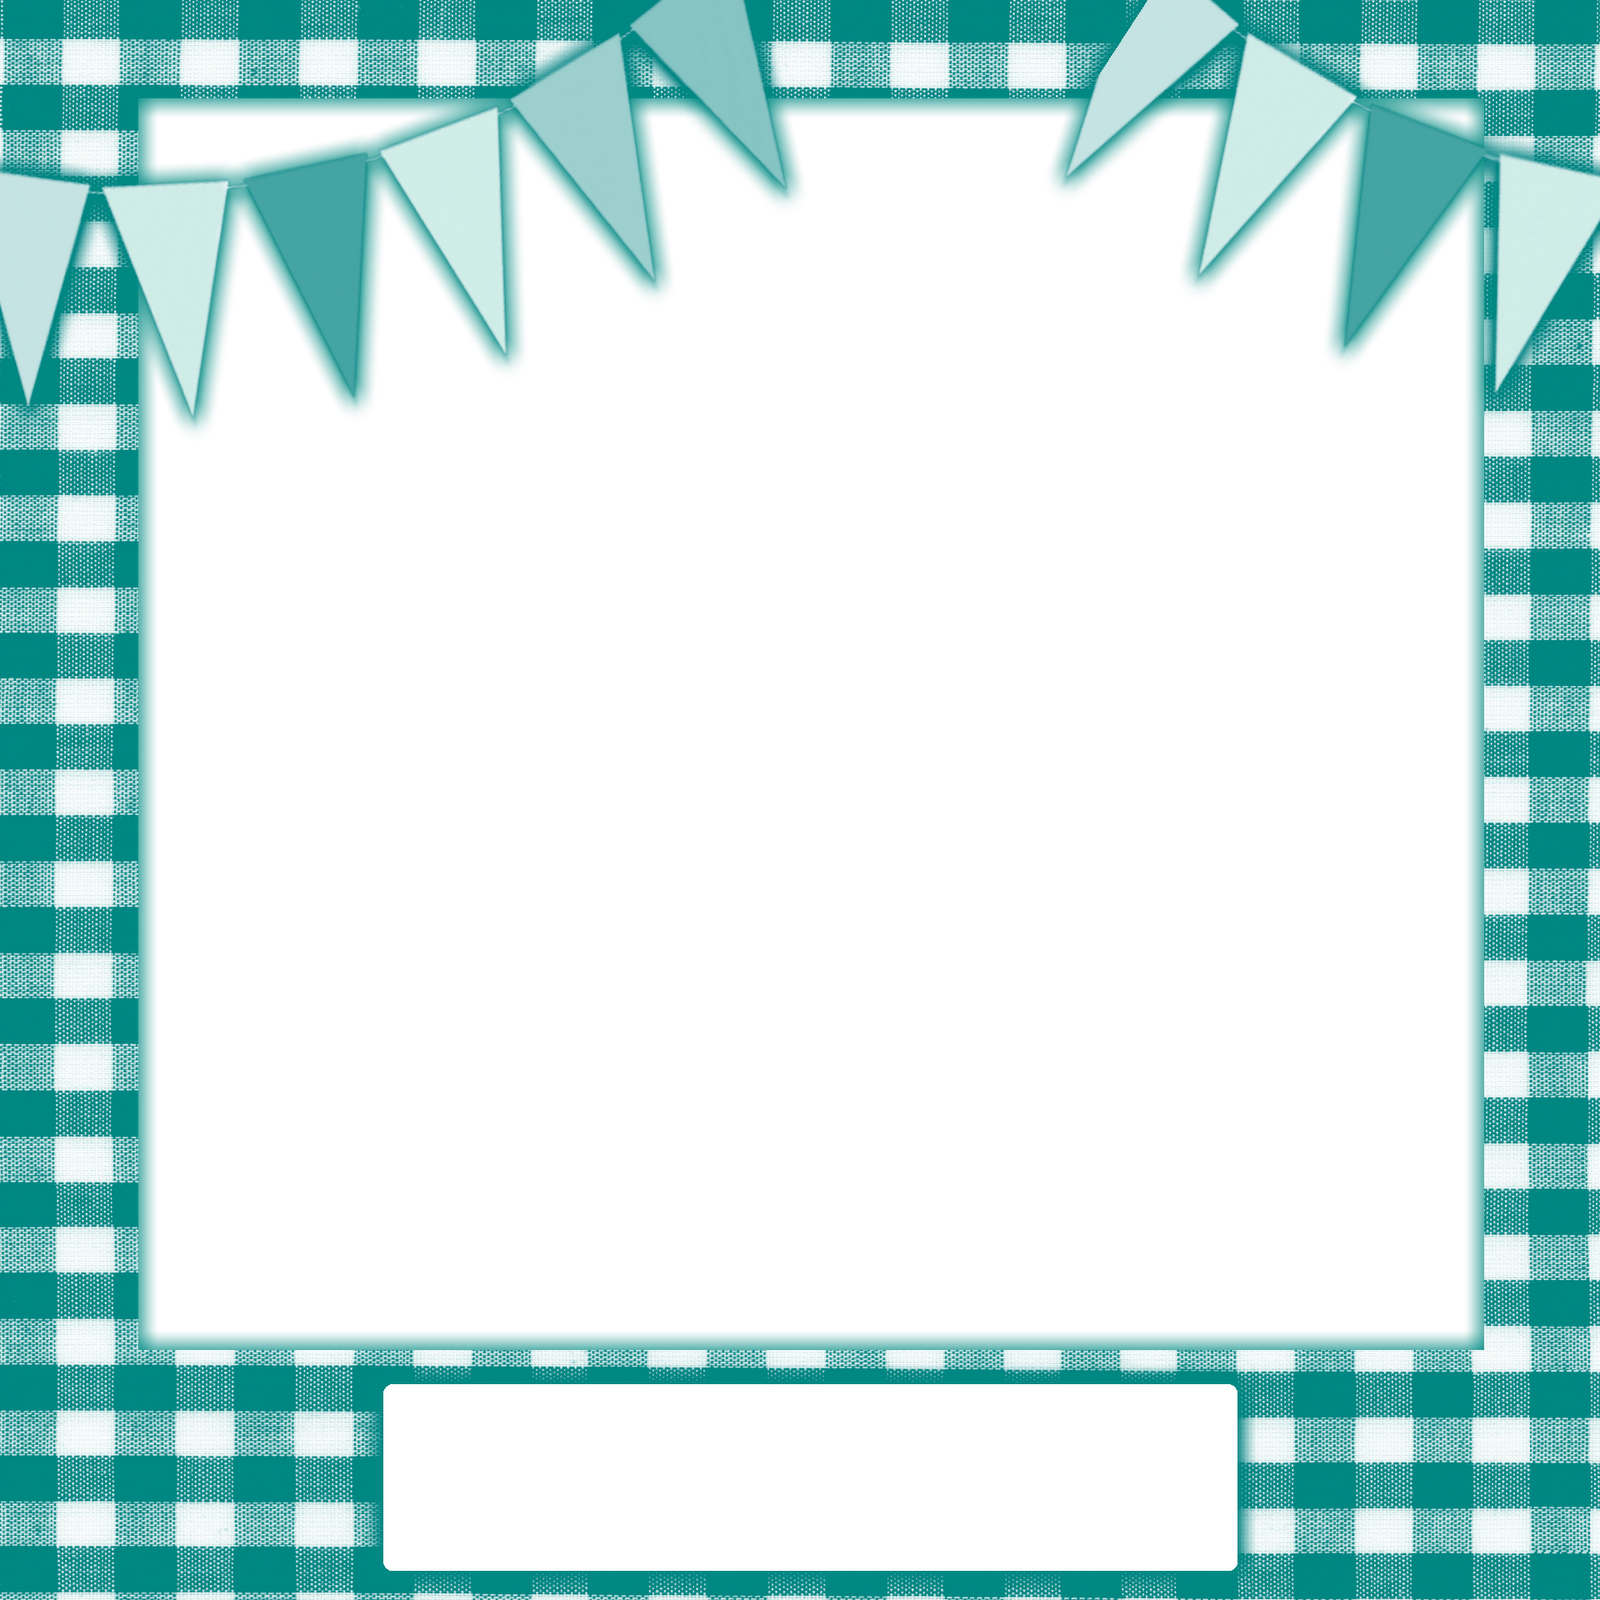 Free Bunting Border Cliparts, Download Free Clip Art, Free.